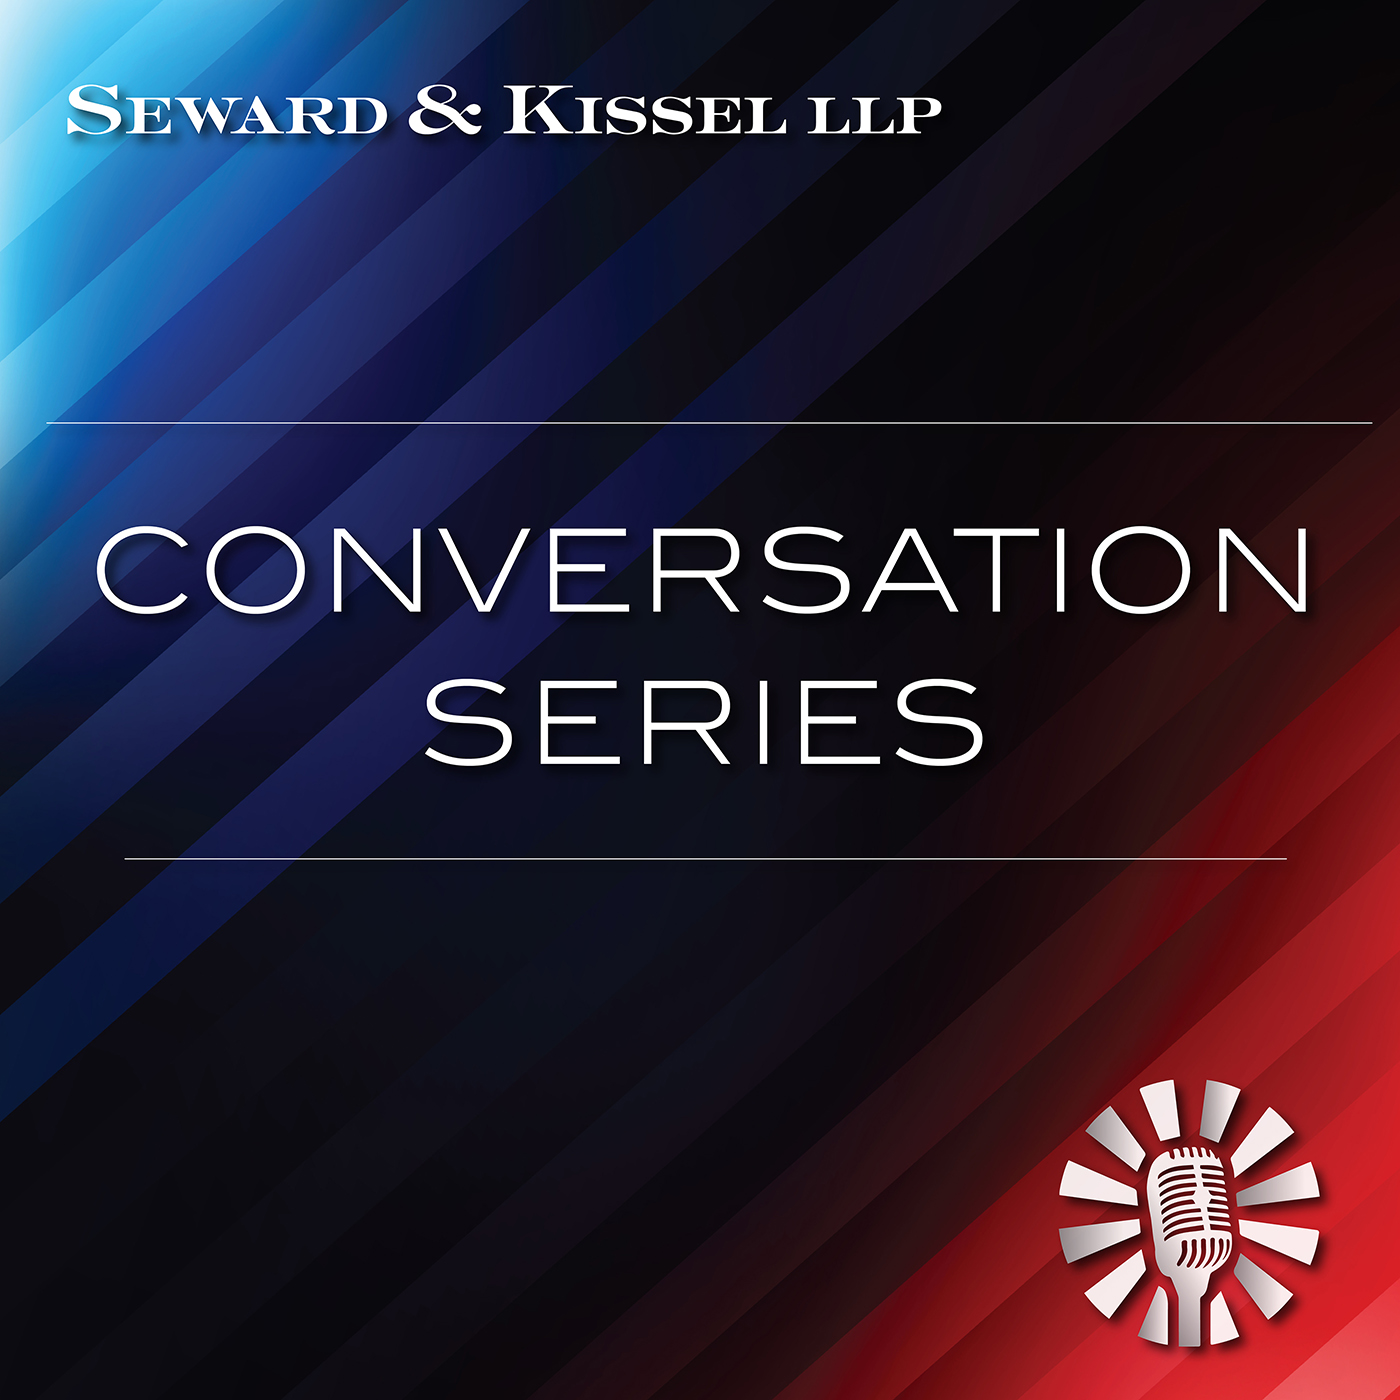 Conversation Series with Sean O’Dowd, Managing Director and Family Business Advisor at Silvercrest Asset Management Group